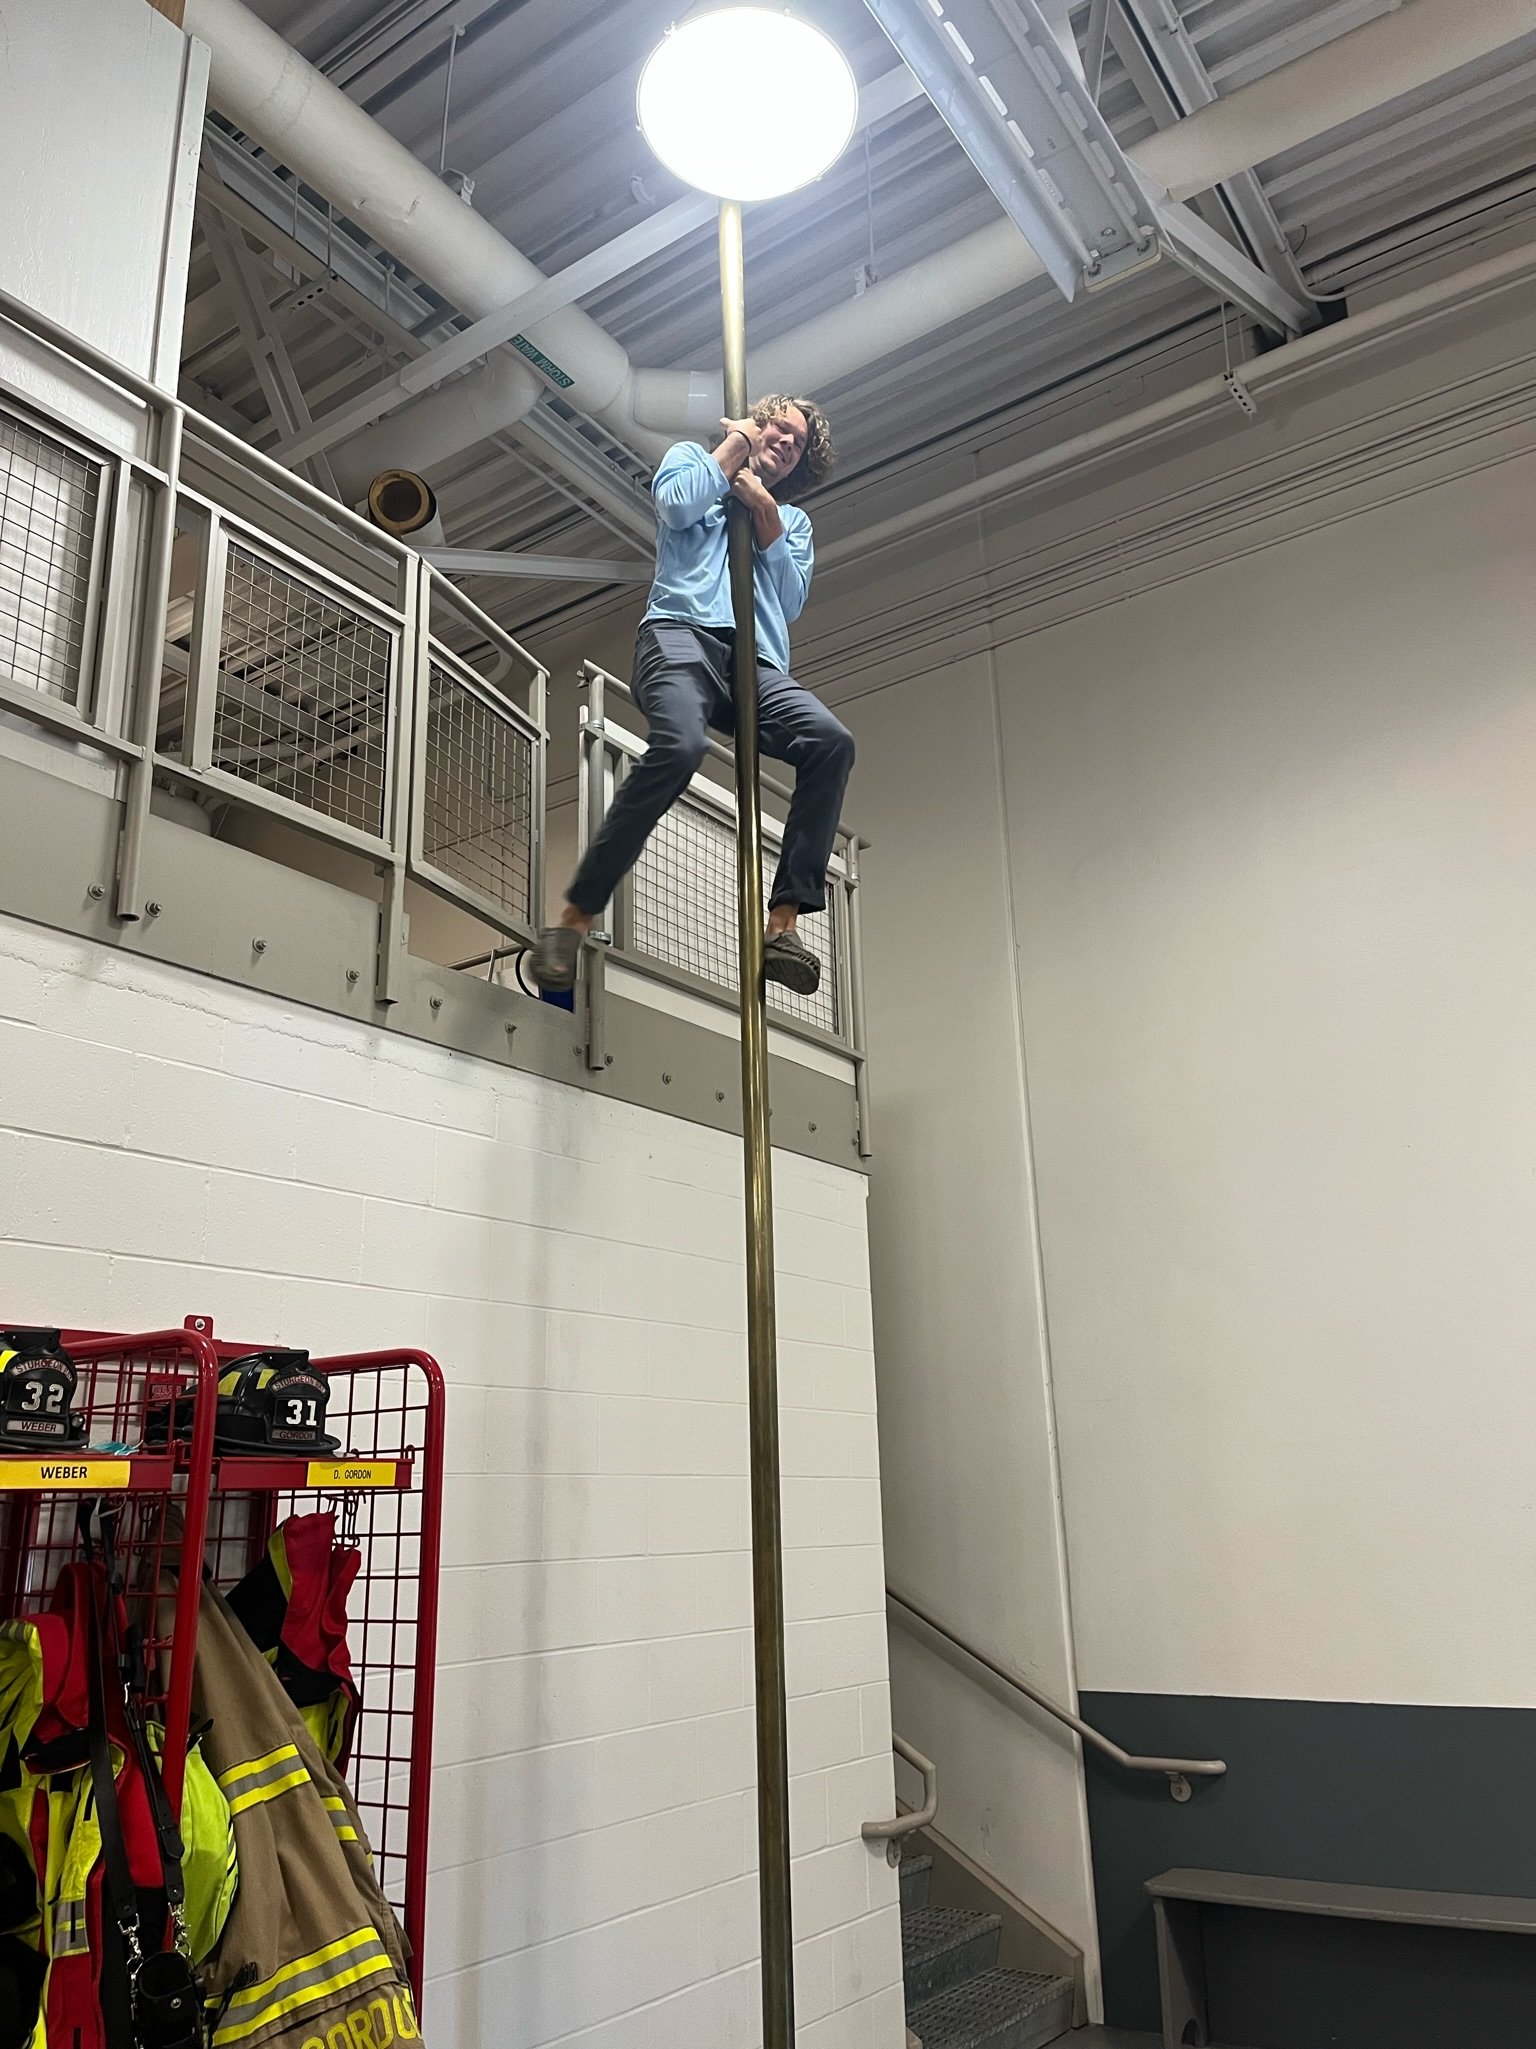 Cain conquering the fireman pole, wow he is good at that